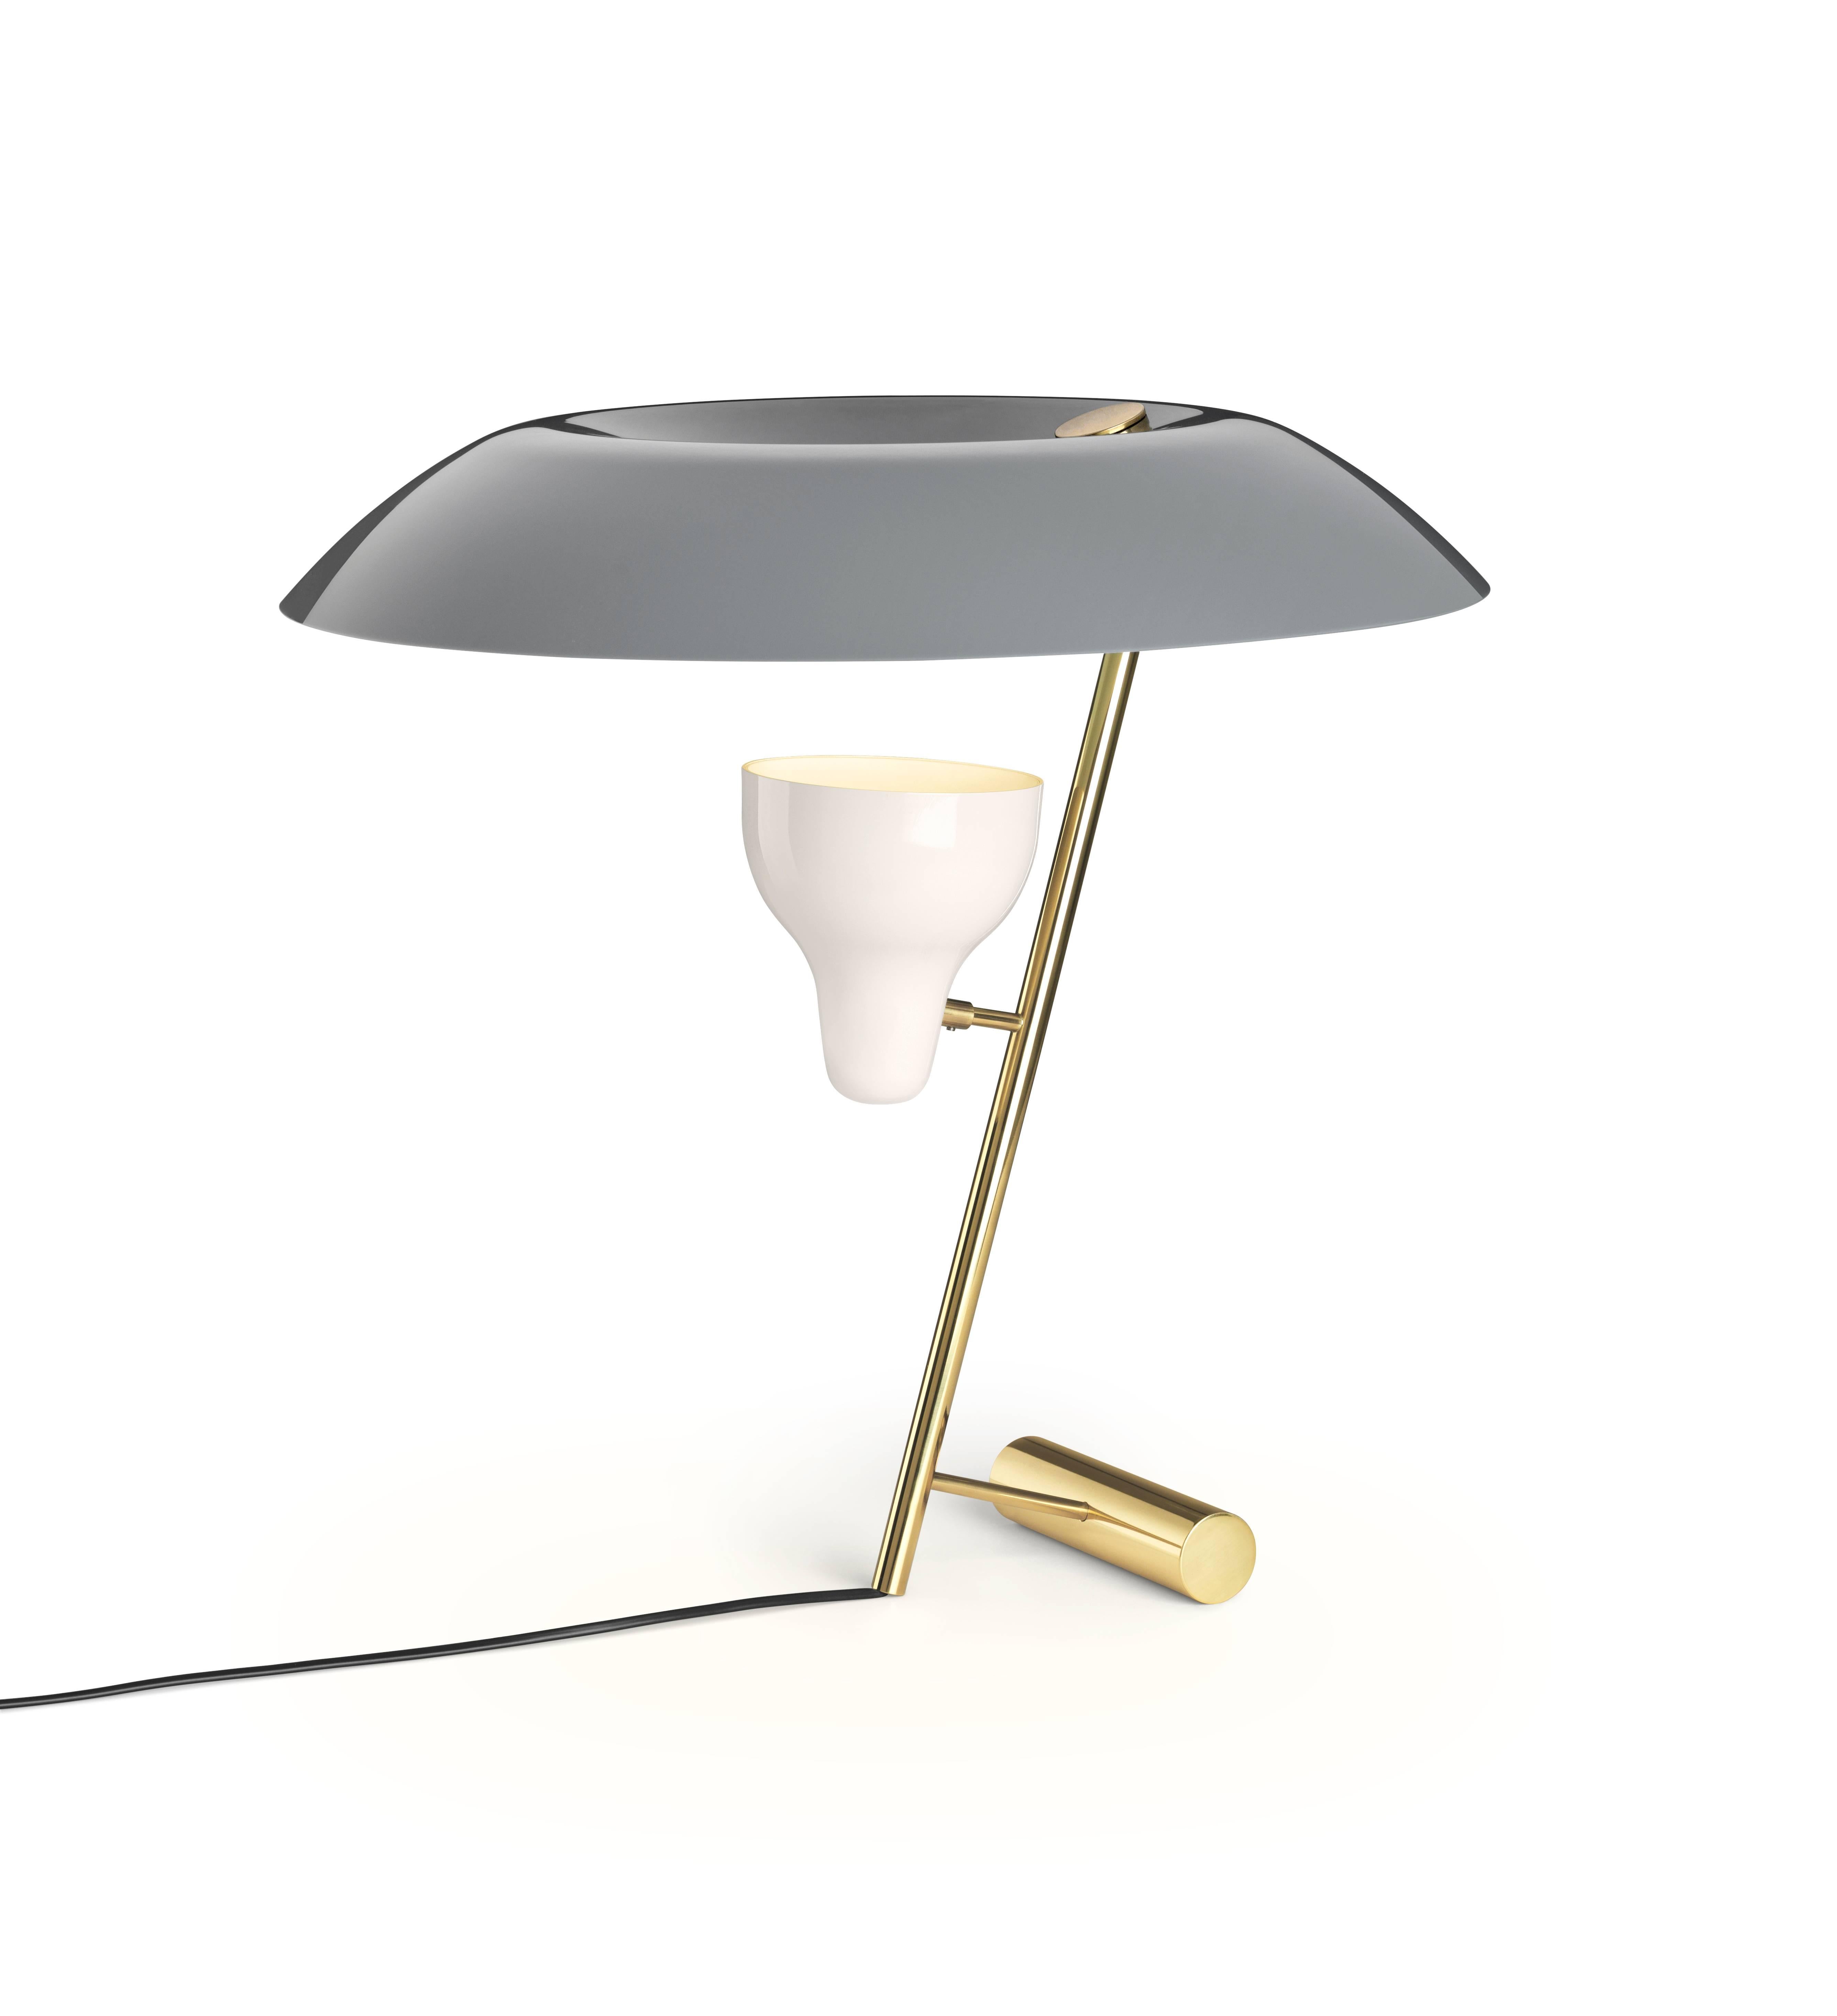 Gino Sarfatti model #548 table lamp in gray and polished brass.

Designed in 1951, this is an authorized re-edition by Alessandro Sarfatti, grandson of Gino Sarfatti, who applies his grandfather's scrupulous attention to detail and materials to